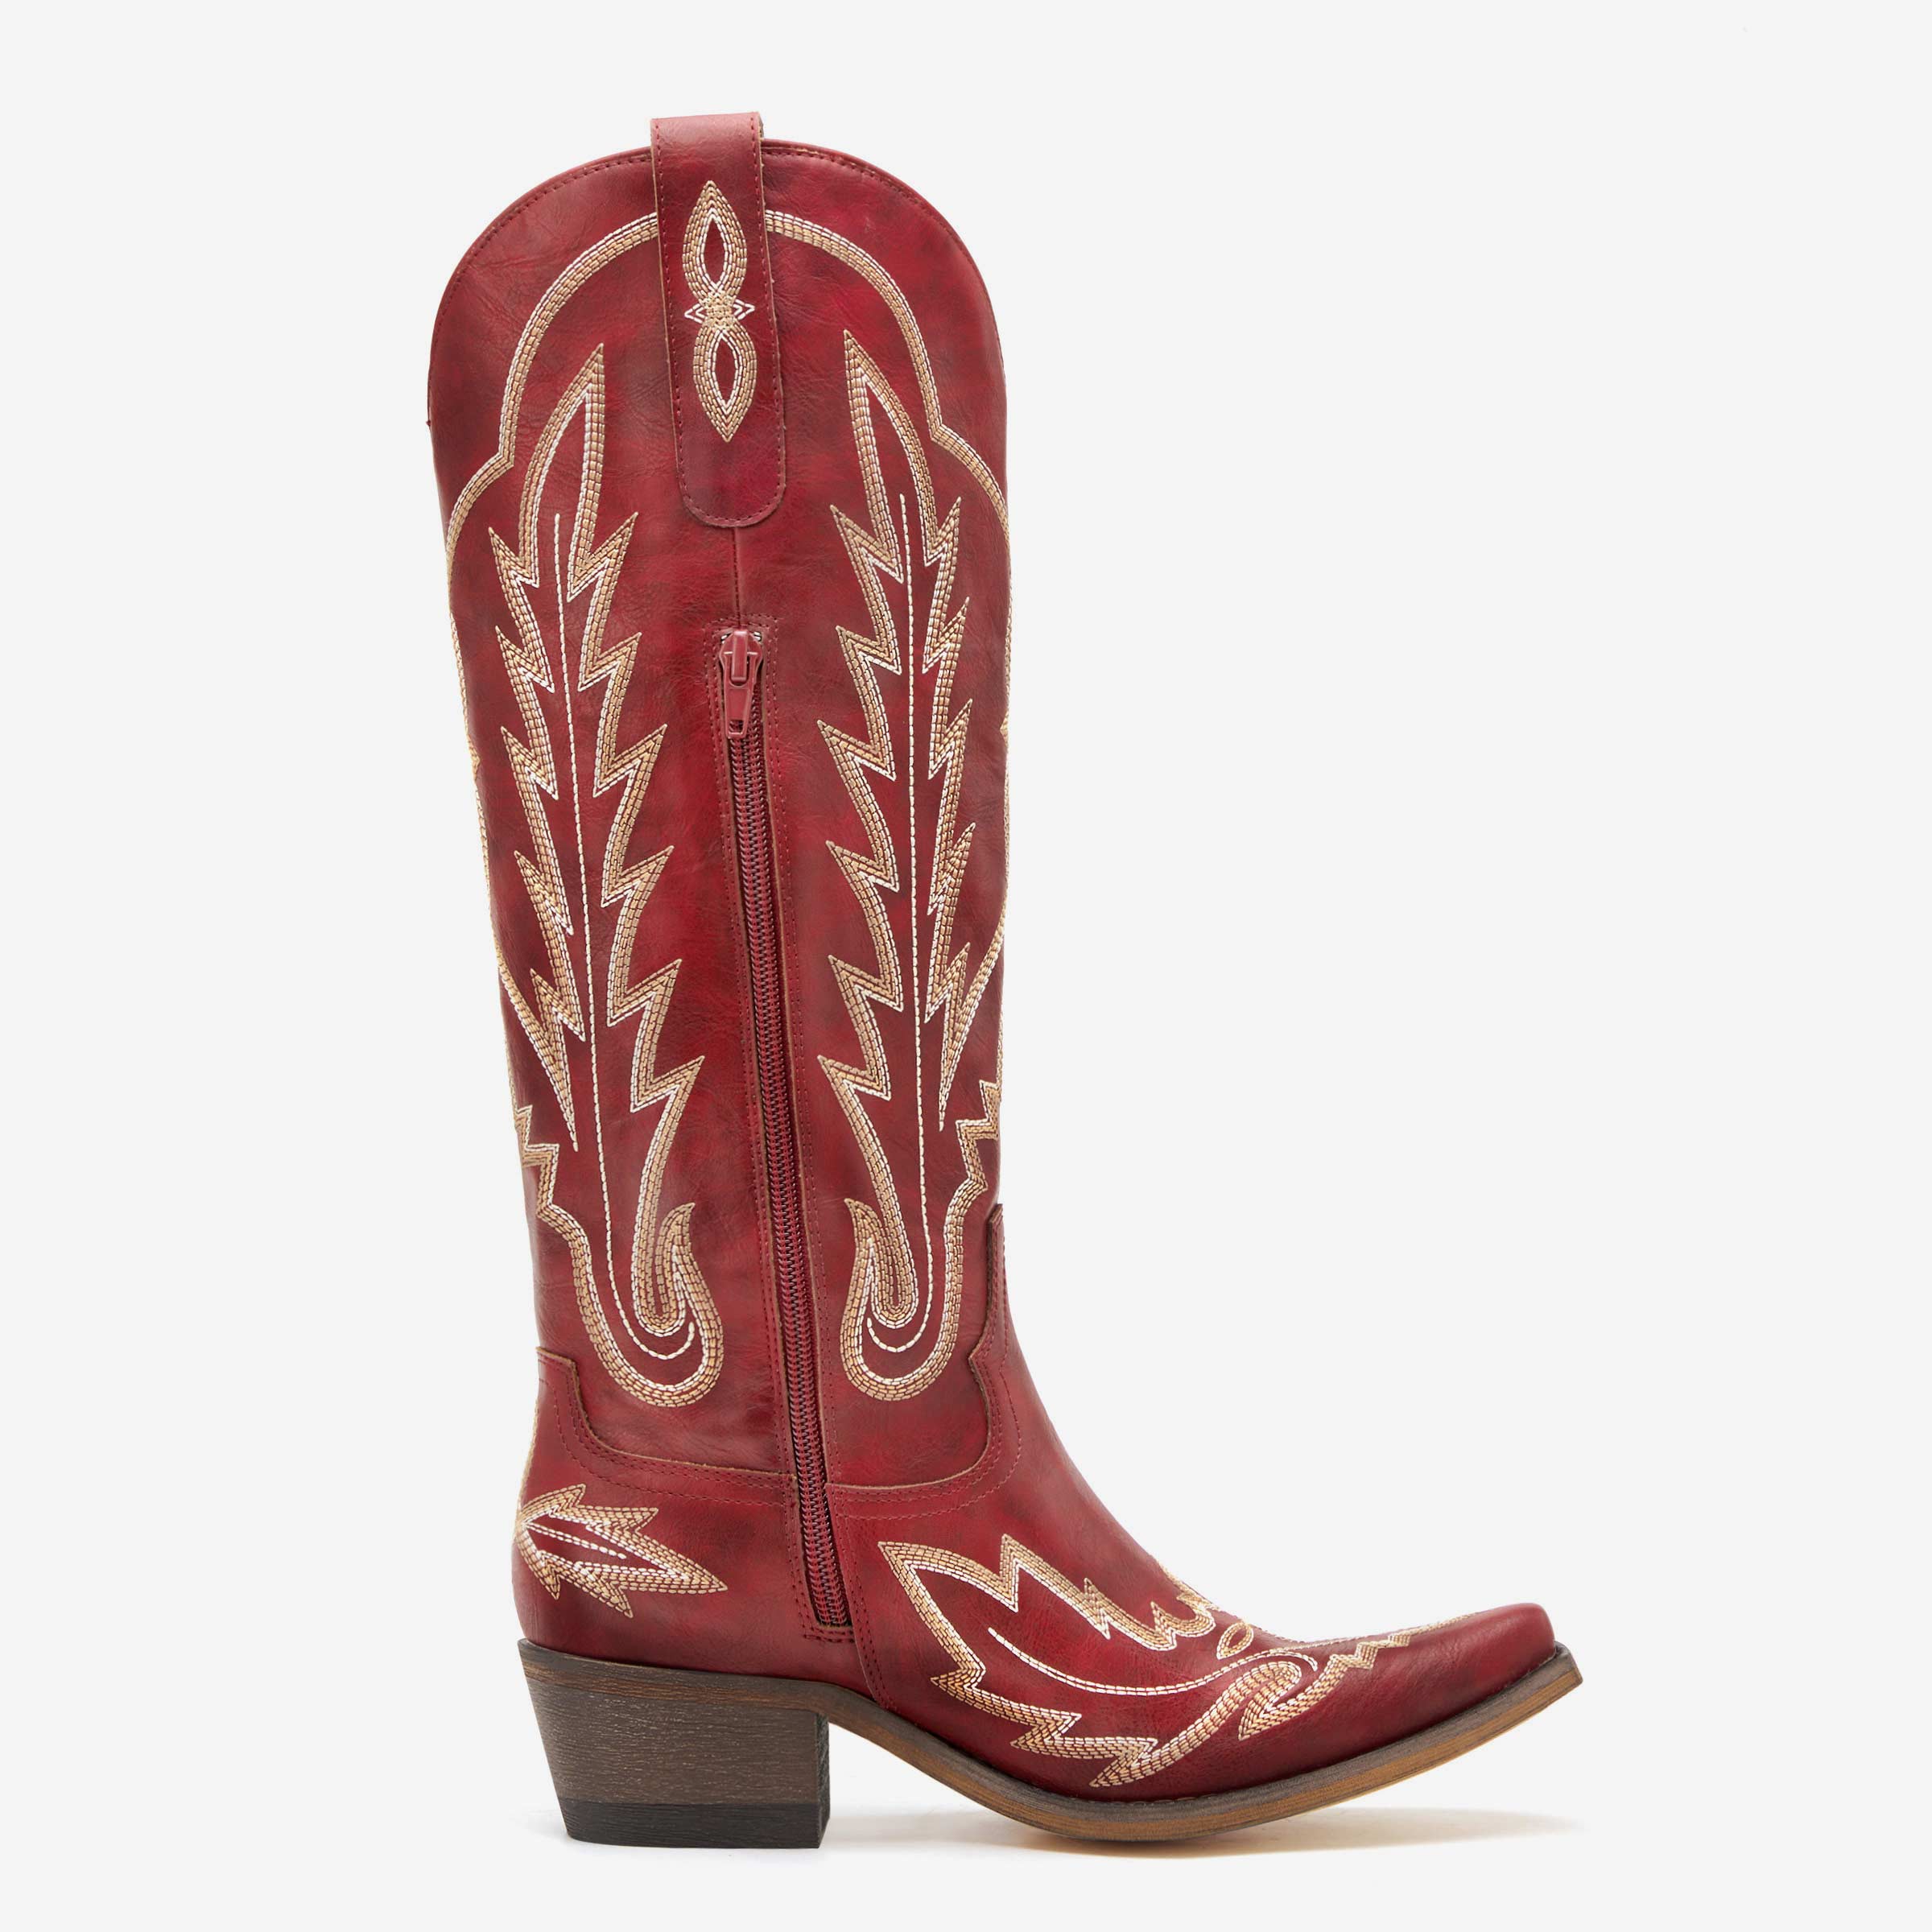 REDTOP Women's Western Cowgirl Boots, Red Embroidered Vintage, Stylish, Flexible